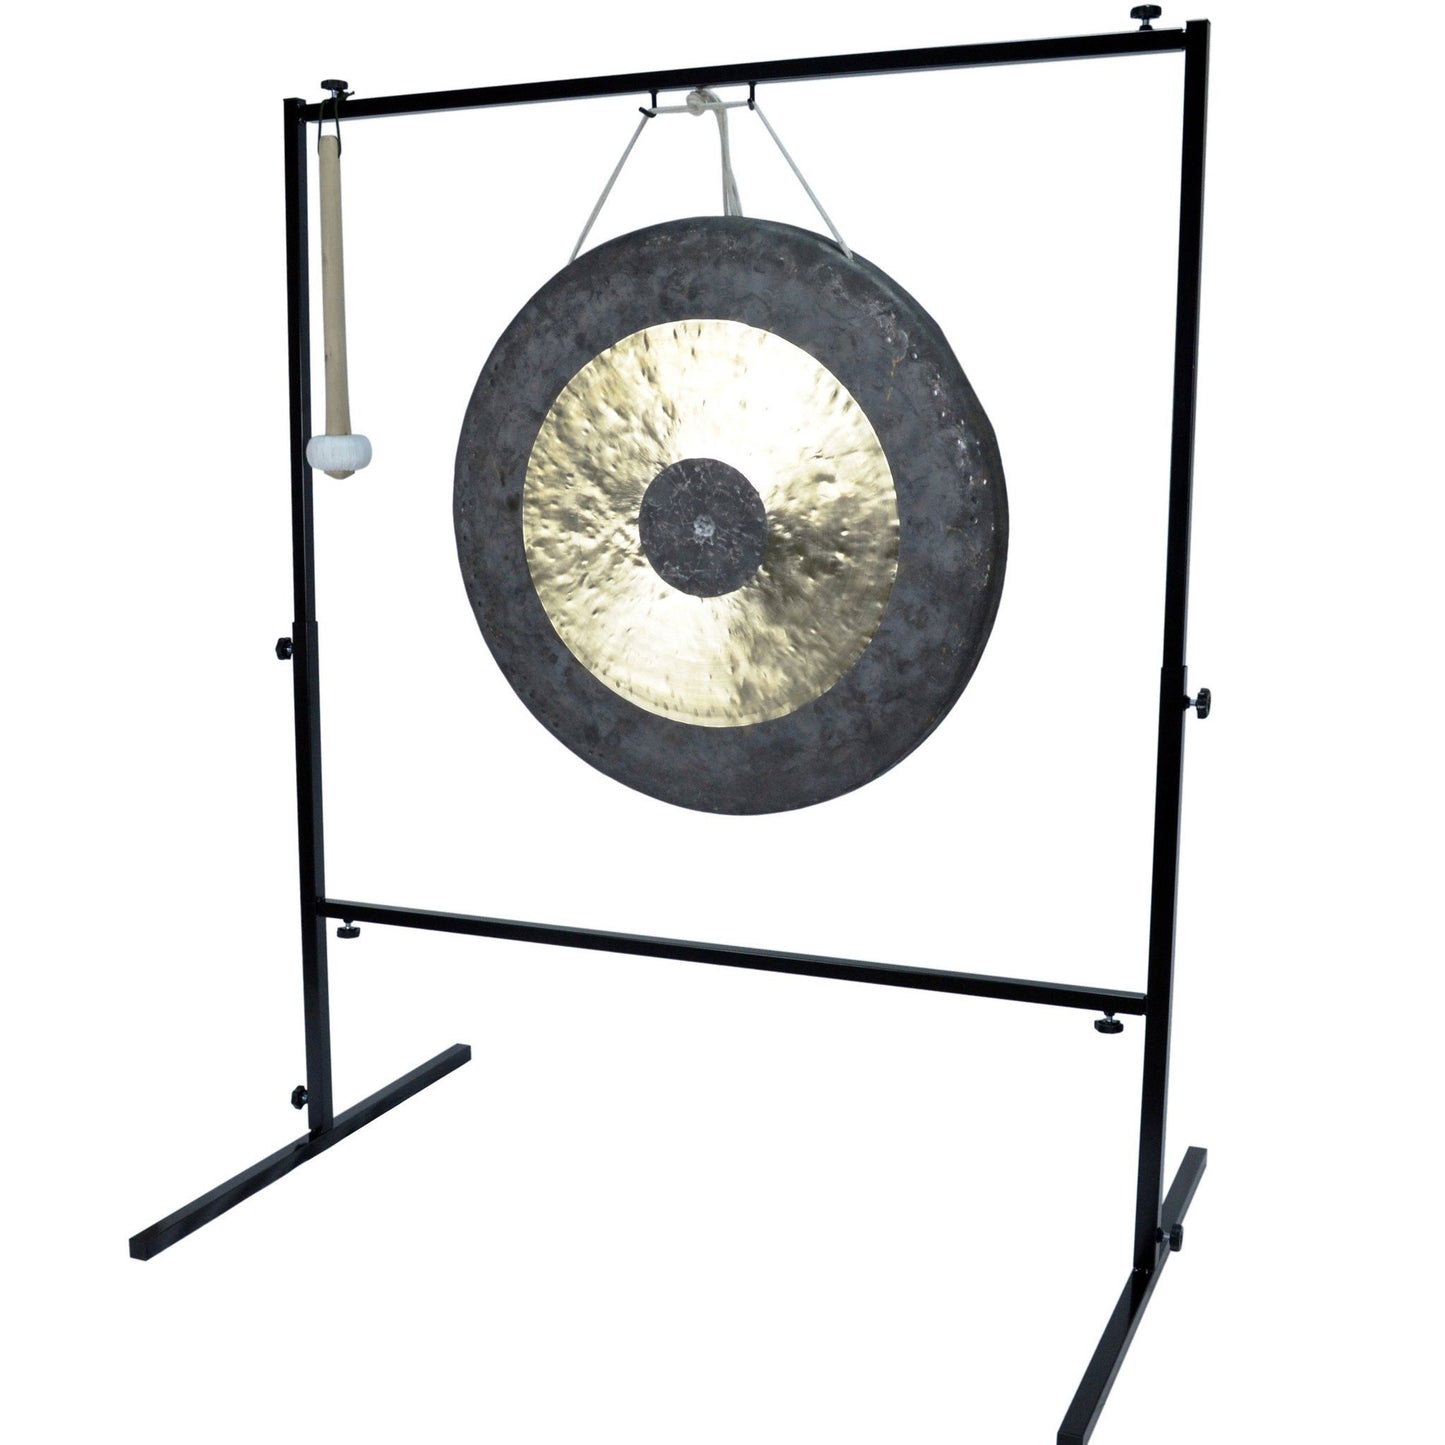 28" Chau Gong on Wuhan Gong Stand with Mallet